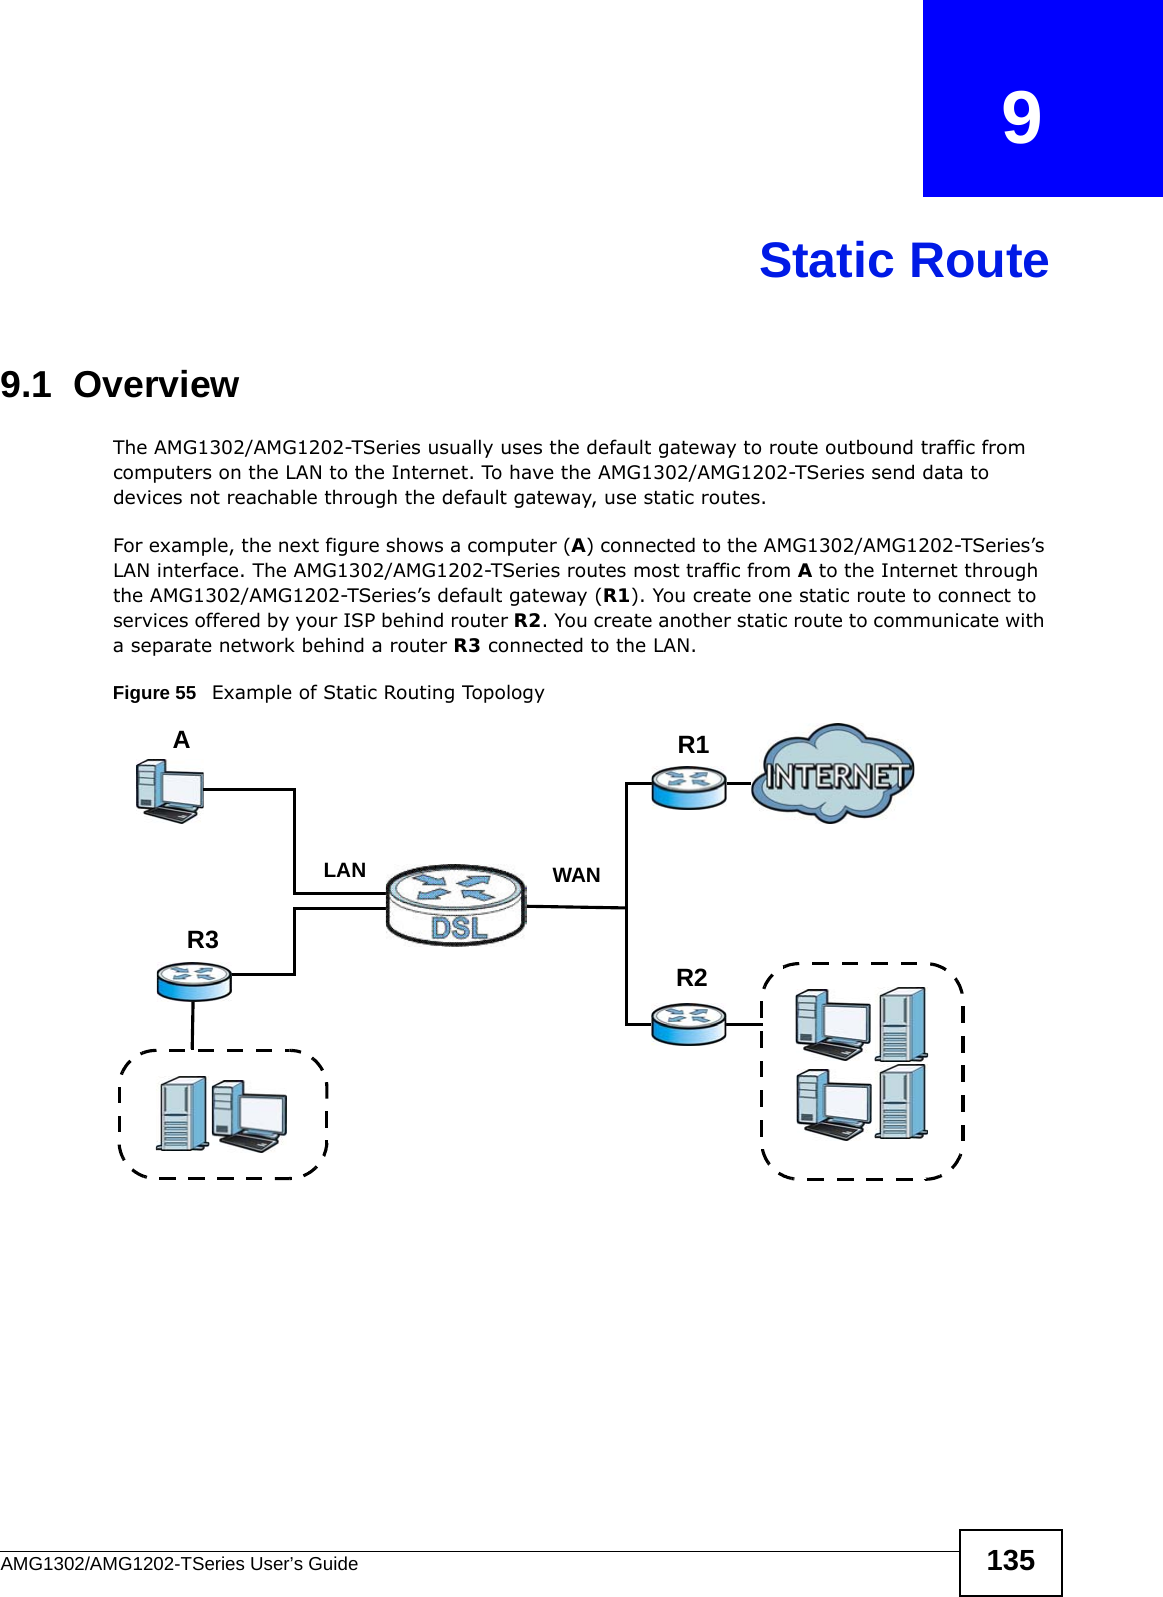 AMG1302/AMG1202-TSeries User’s Guide 135CHAPTER   9Static Route9.1  Overview The AMG1302/AMG1202-TSeries usually uses the default gateway to route outbound traffic from computers on the LAN to the Internet. To have the AMG1302/AMG1202-TSeries send data to devices not reachable through the default gateway, use static routes.For example, the next figure shows a computer (A) connected to the AMG1302/AMG1202-TSeries’s LAN interface. The AMG1302/AMG1202-TSeries routes most traffic from A to the Internet through the AMG1302/AMG1202-TSeries’s default gateway (R1). You create one static route to connect to services offered by your ISP behind router R2. You create another static route to communicate with a separate network behind a router R3 connected to the LAN.   Figure 55   Example of Static Routing TopologyWANR1R2AR3LAN